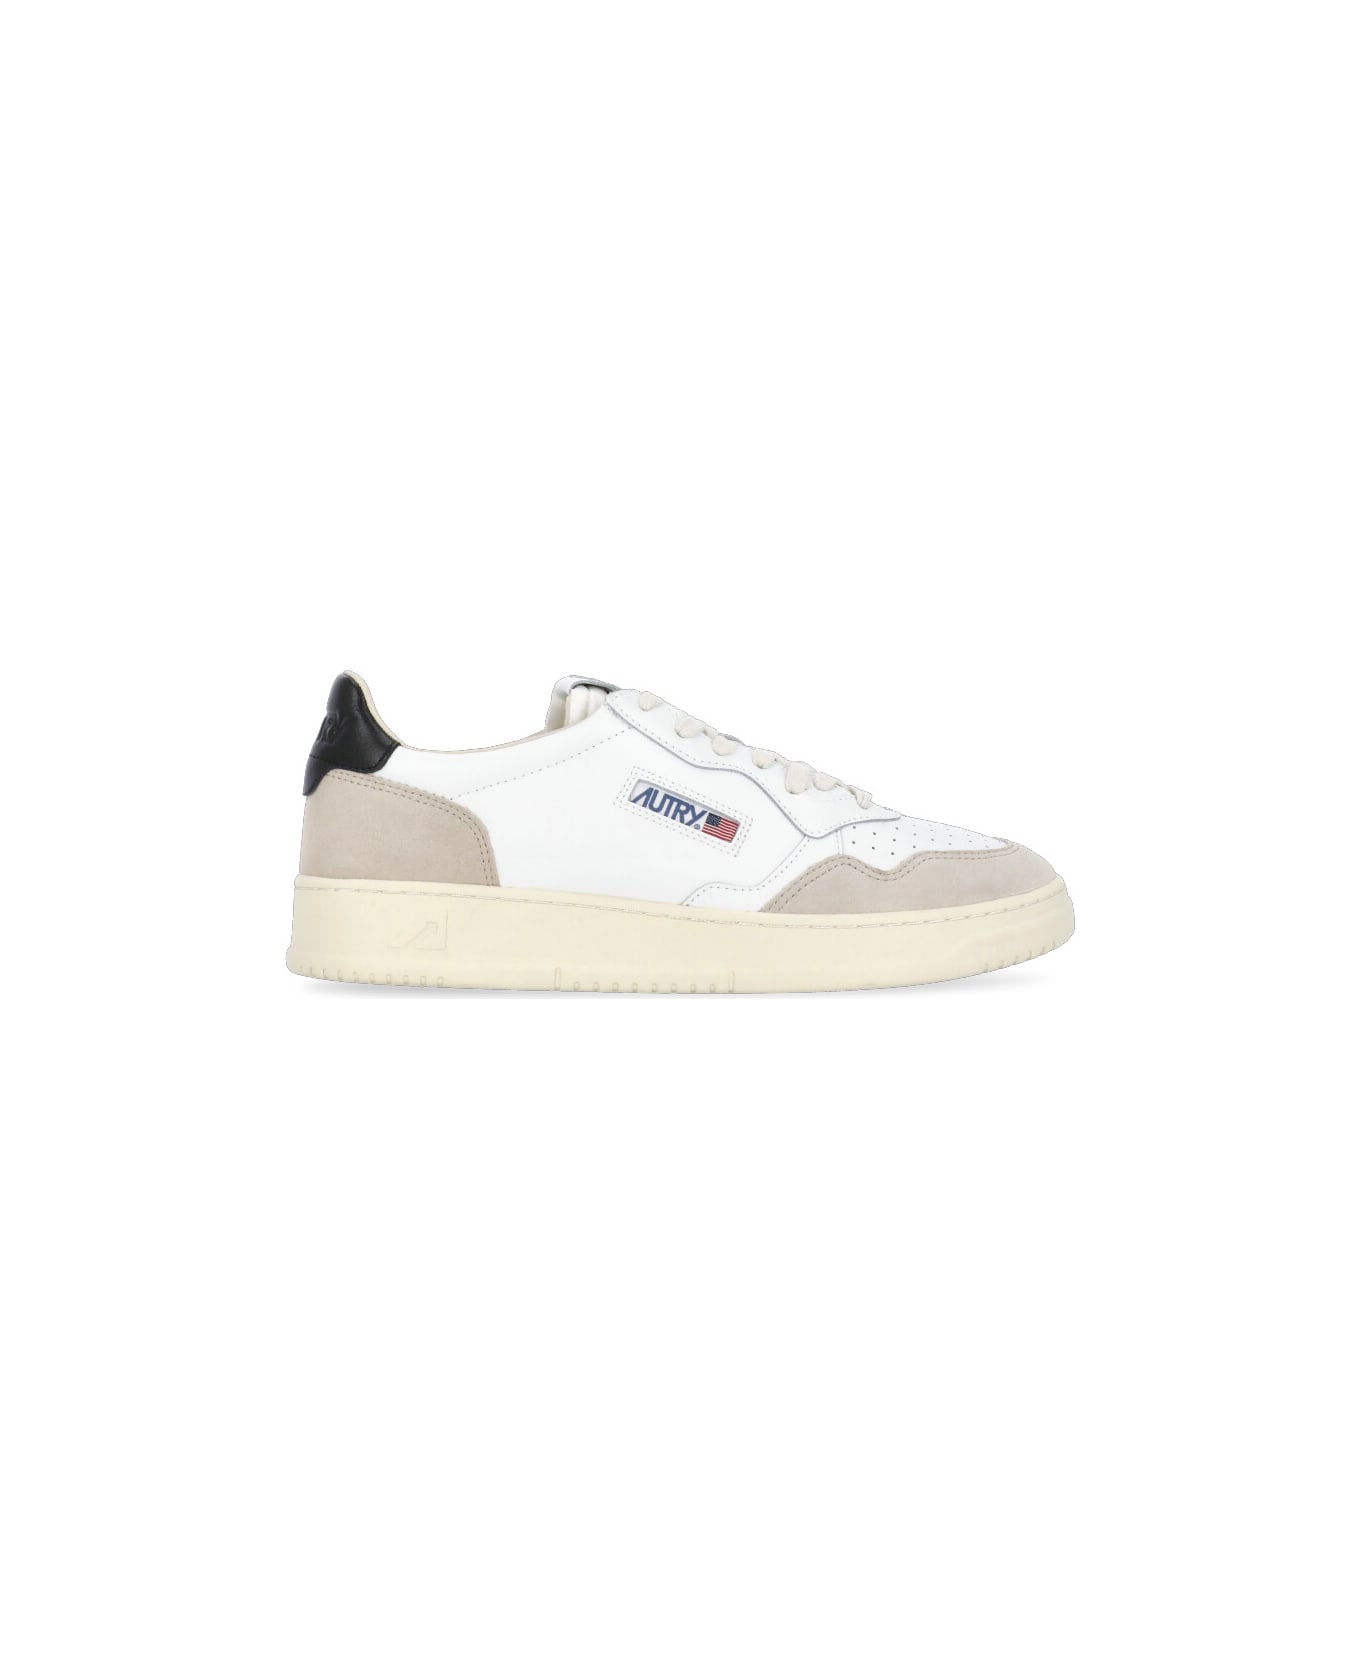 Autry Aulm Ls21 Sneakers - White